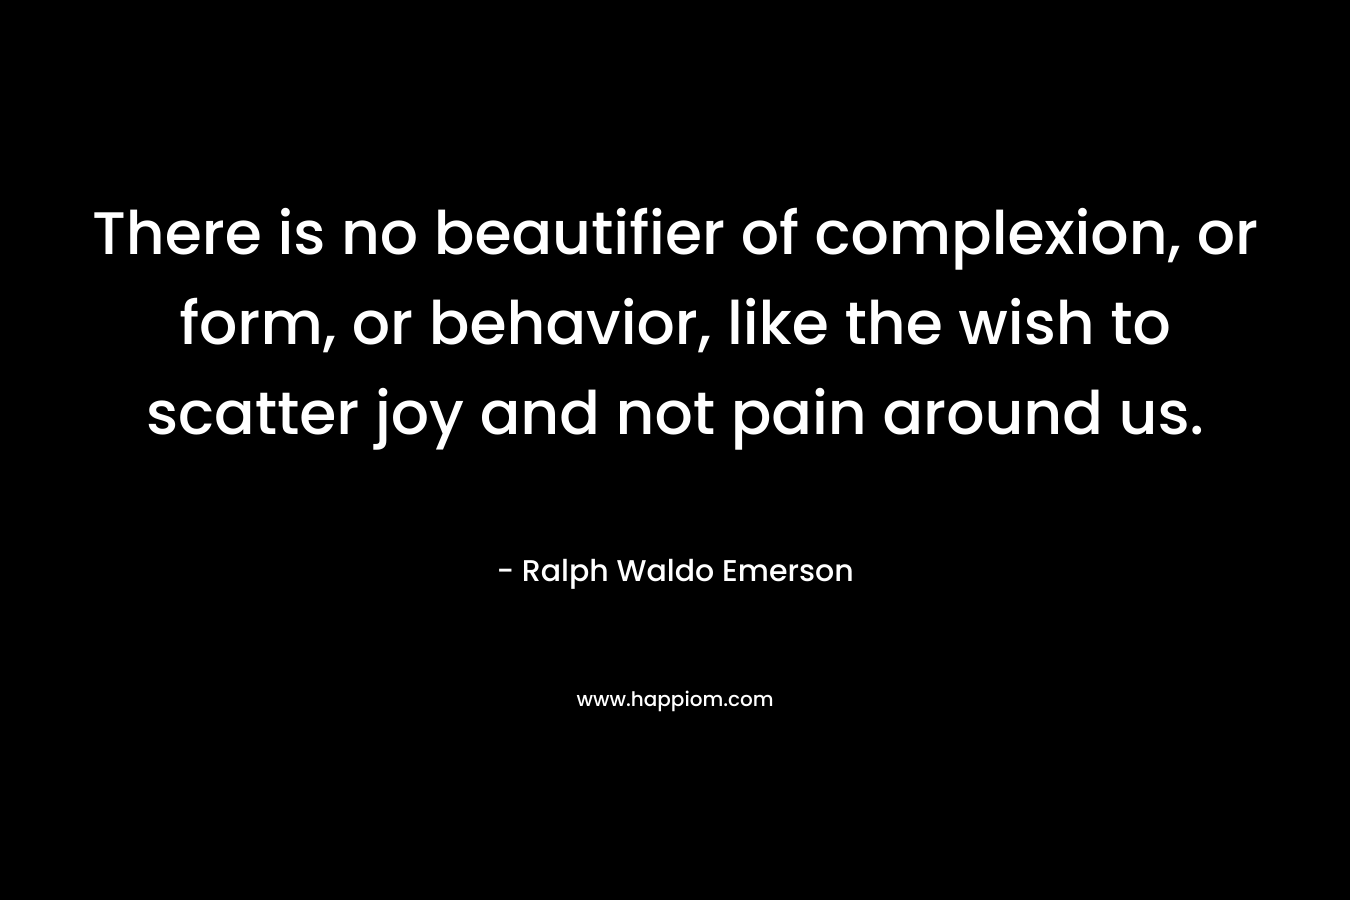 There is no beautifier of complexion, or form, or behavior, like the wish to scatter joy and not pain around us. – Ralph Waldo Emerson